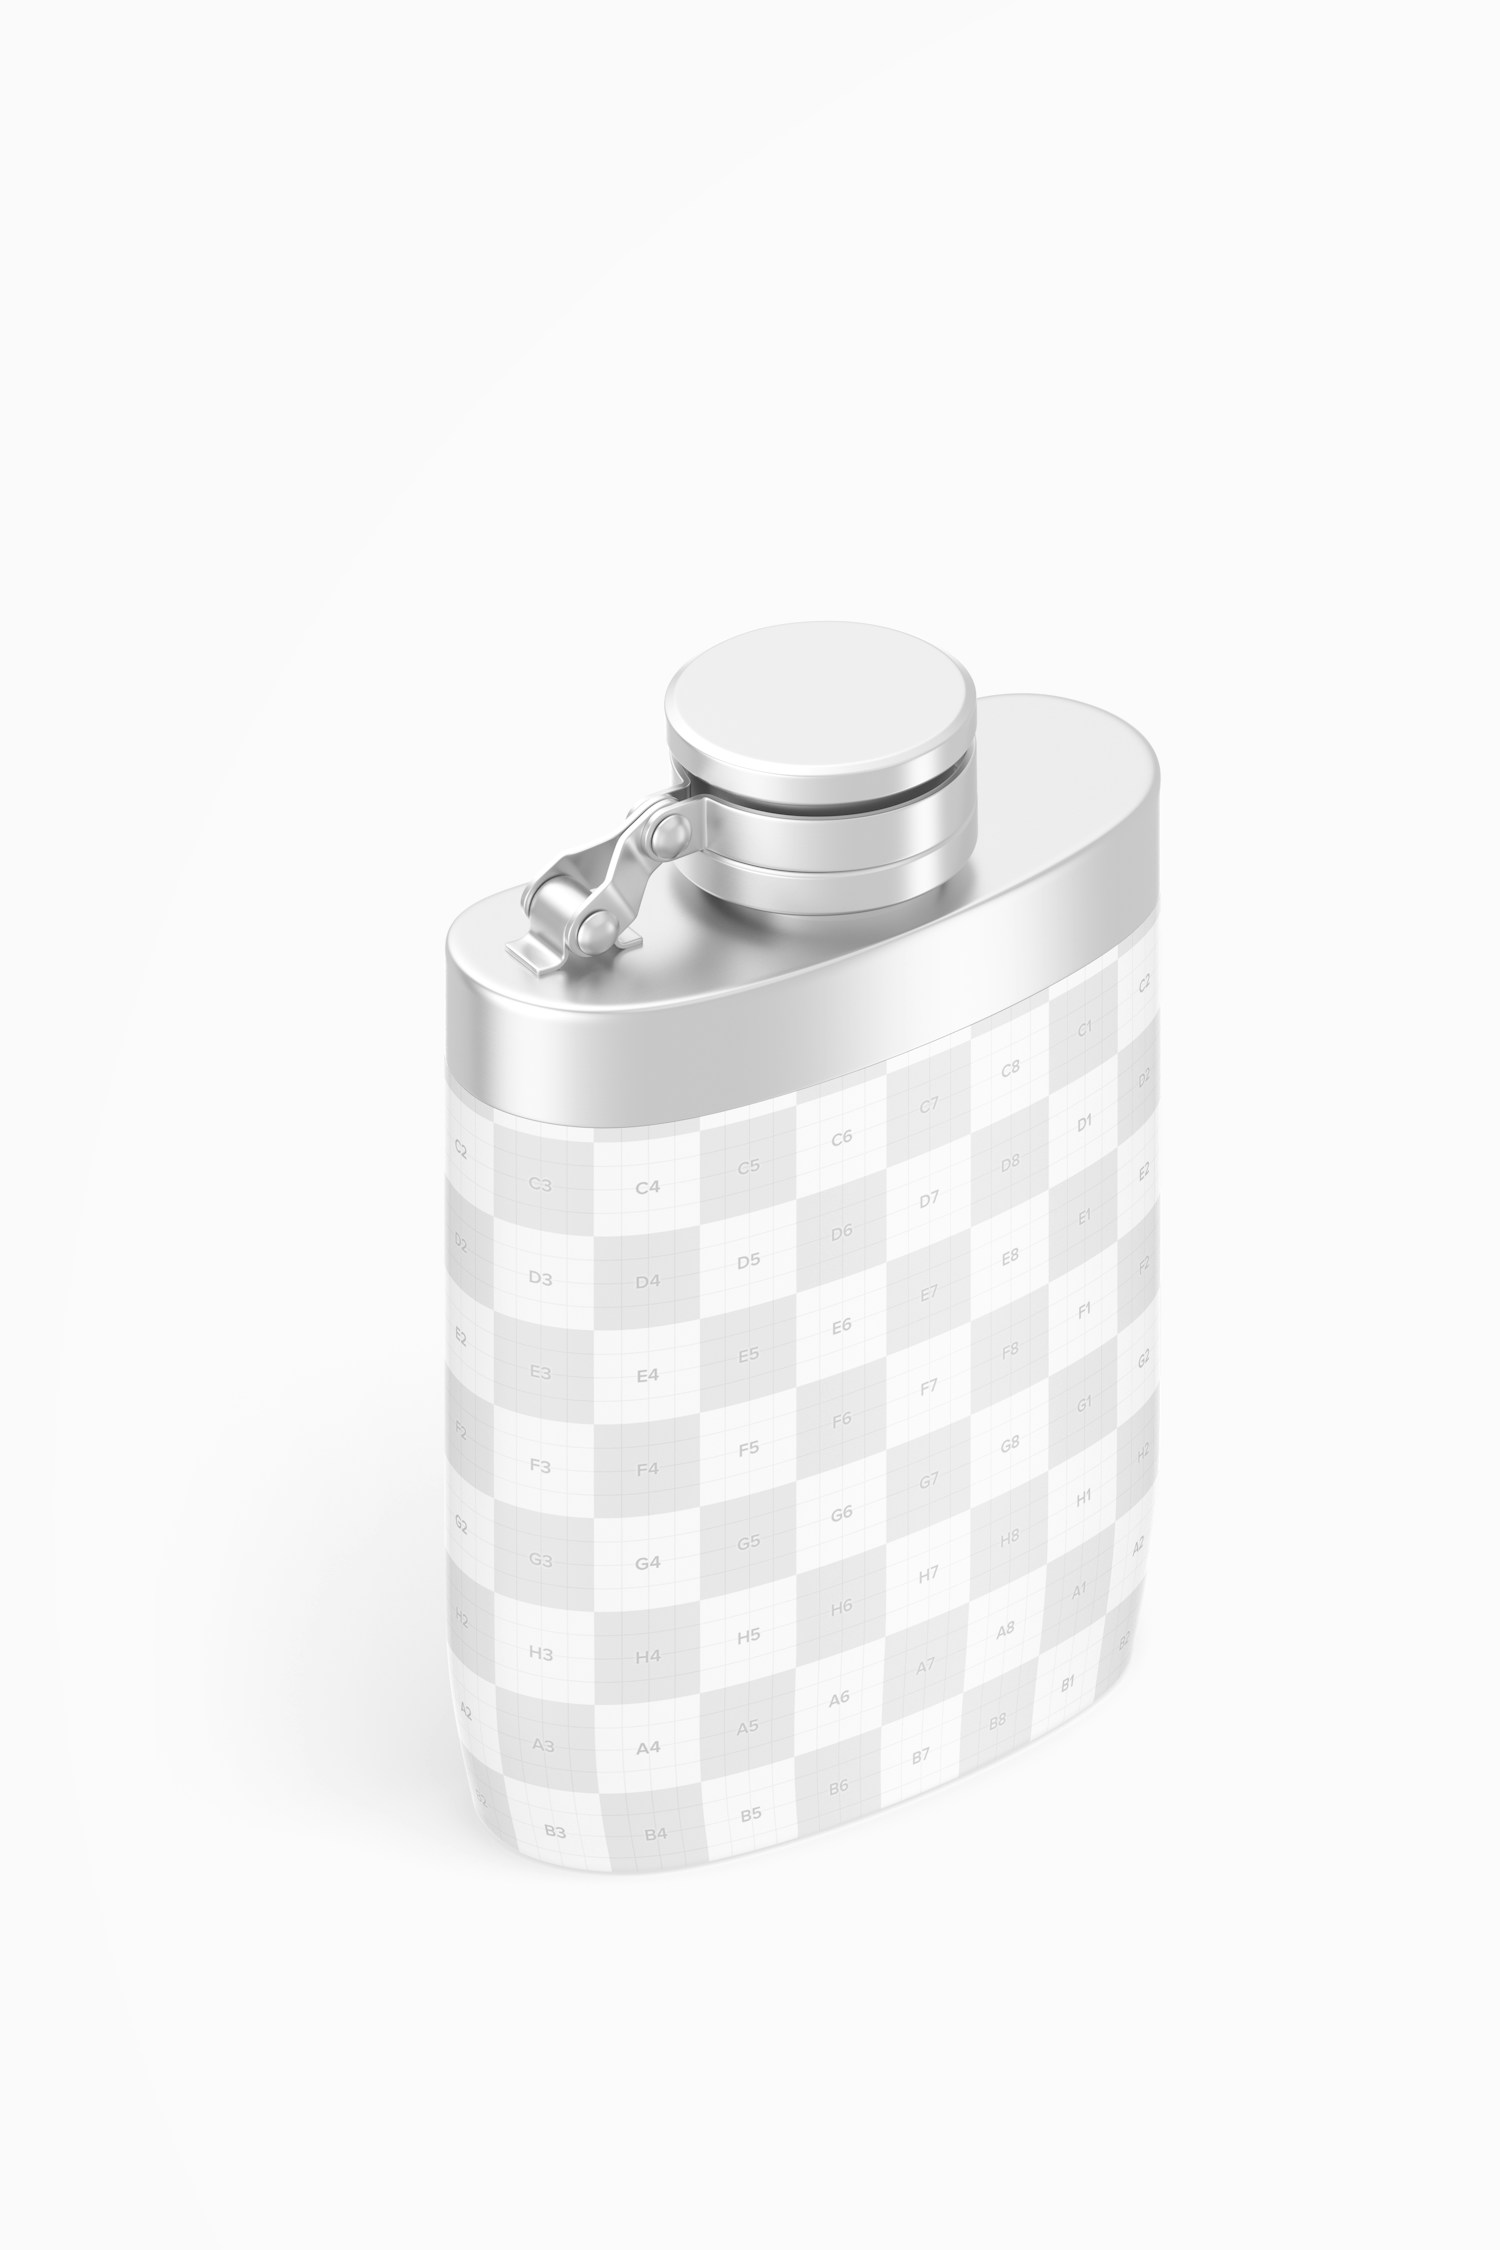 Liquor Flask With Plastic Wrap Mockup, Isometric Right View